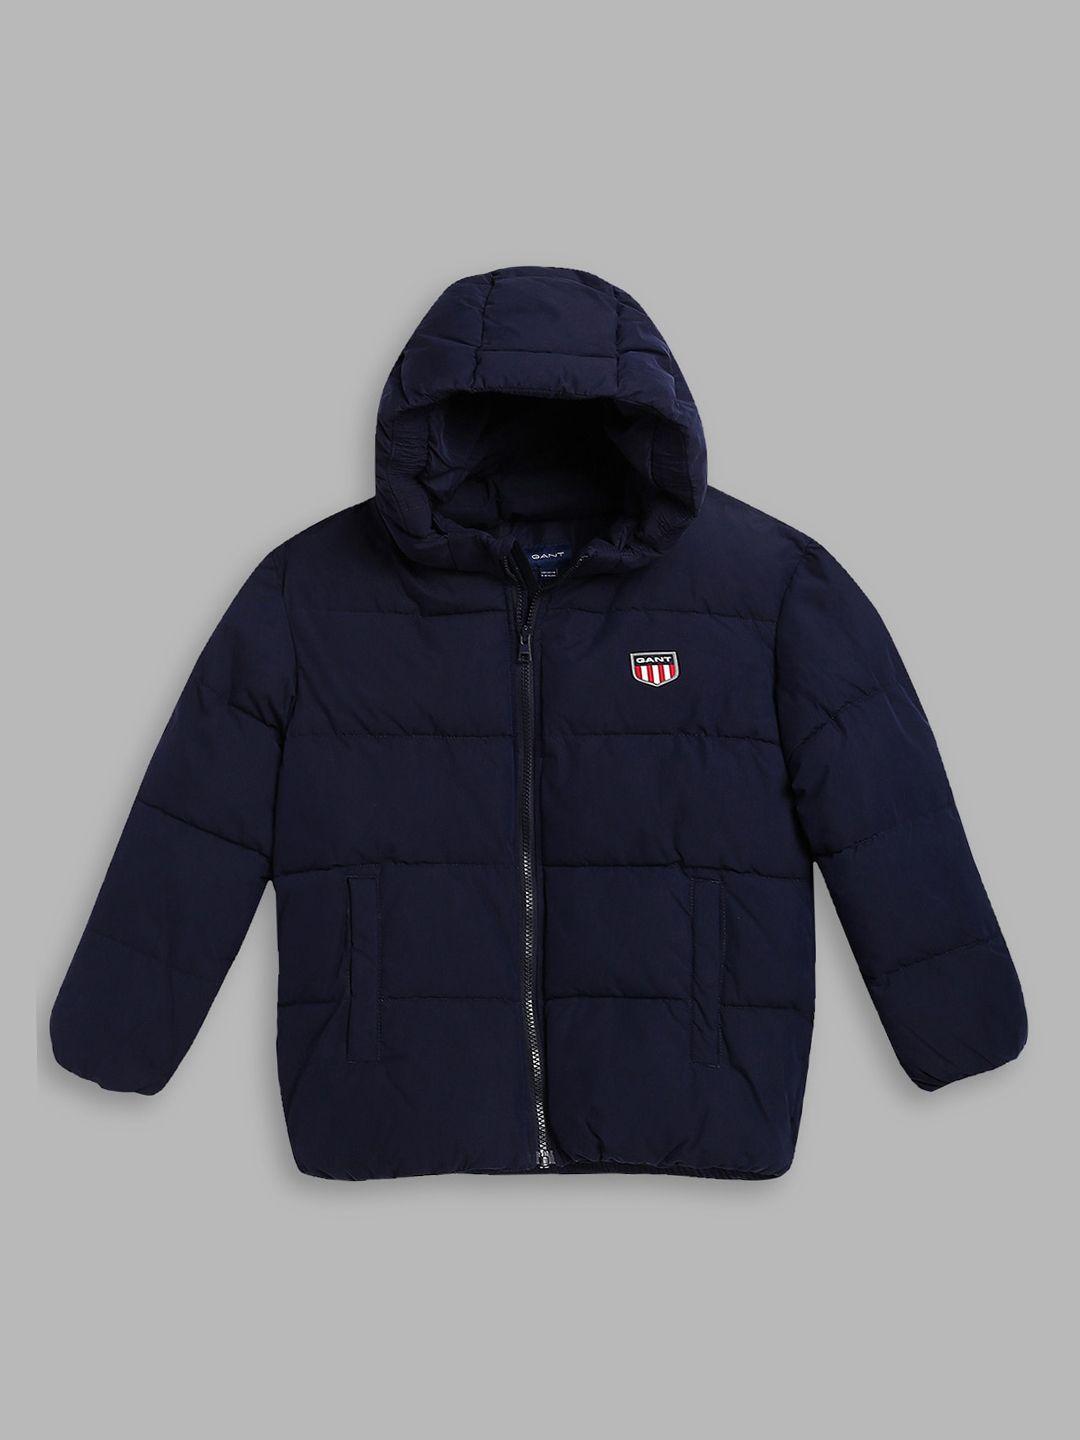 gant boys navy blue crop quilted jacket with embroidered